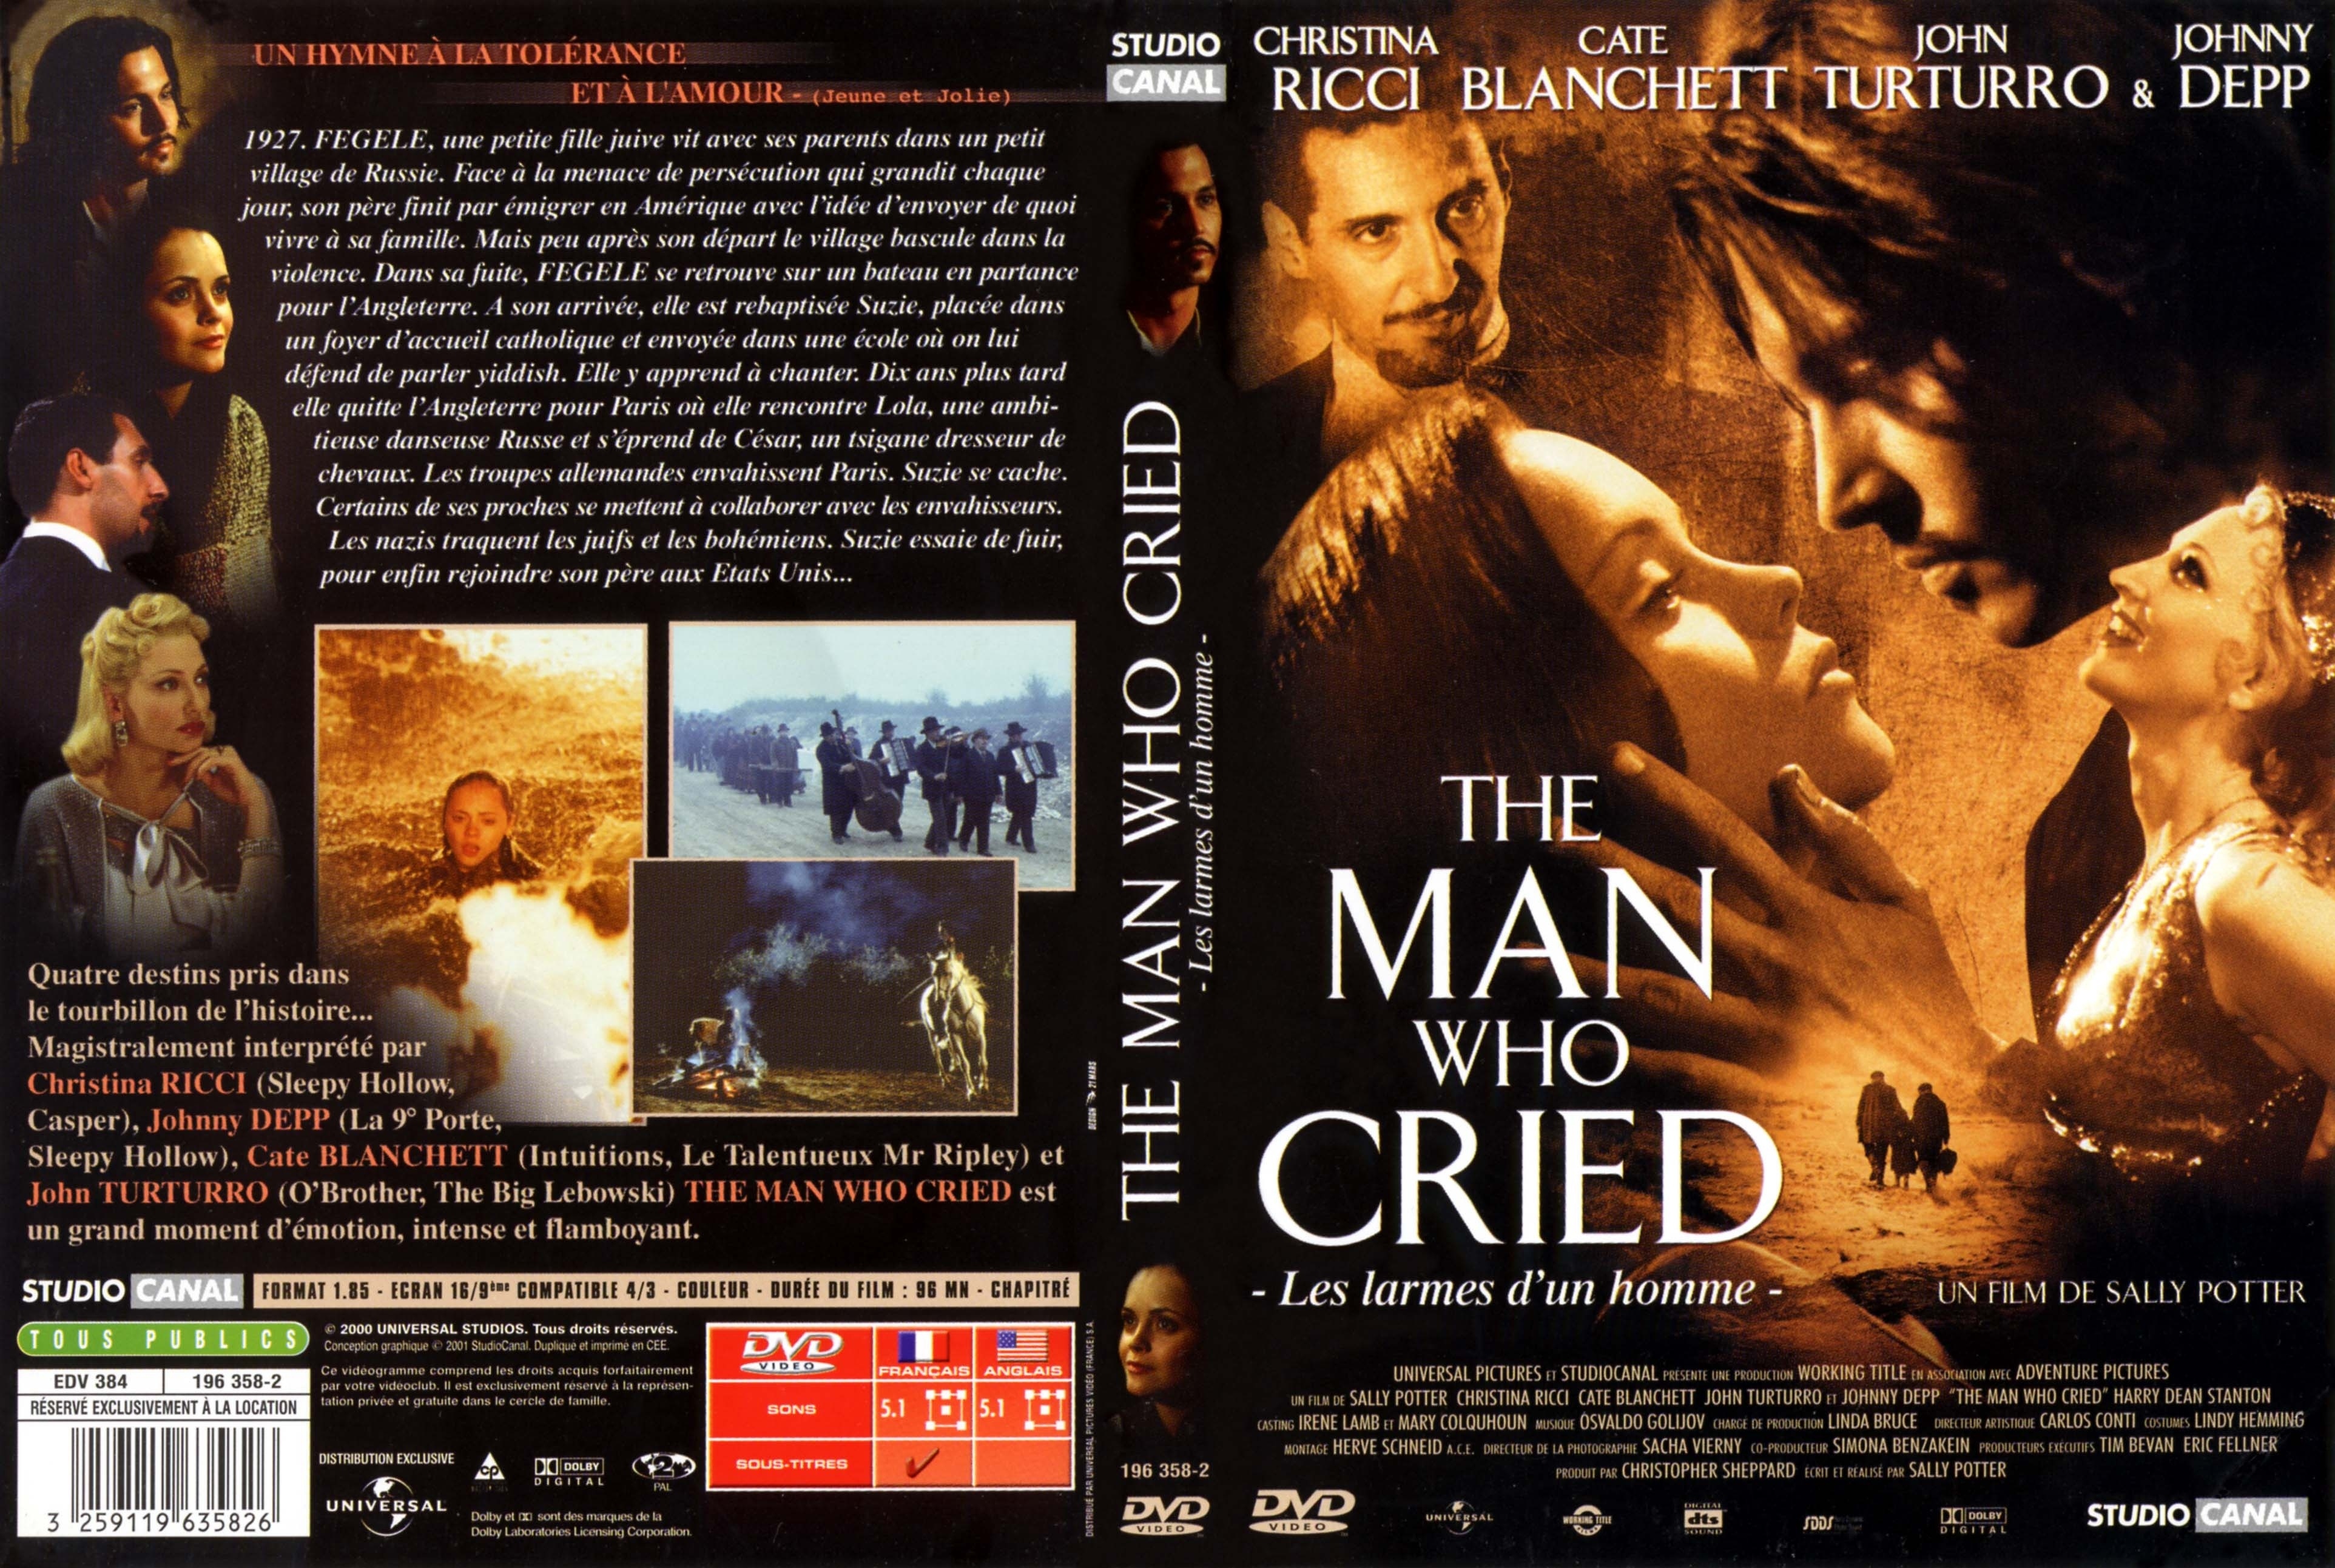 Jaquette DVD The man who cried v2